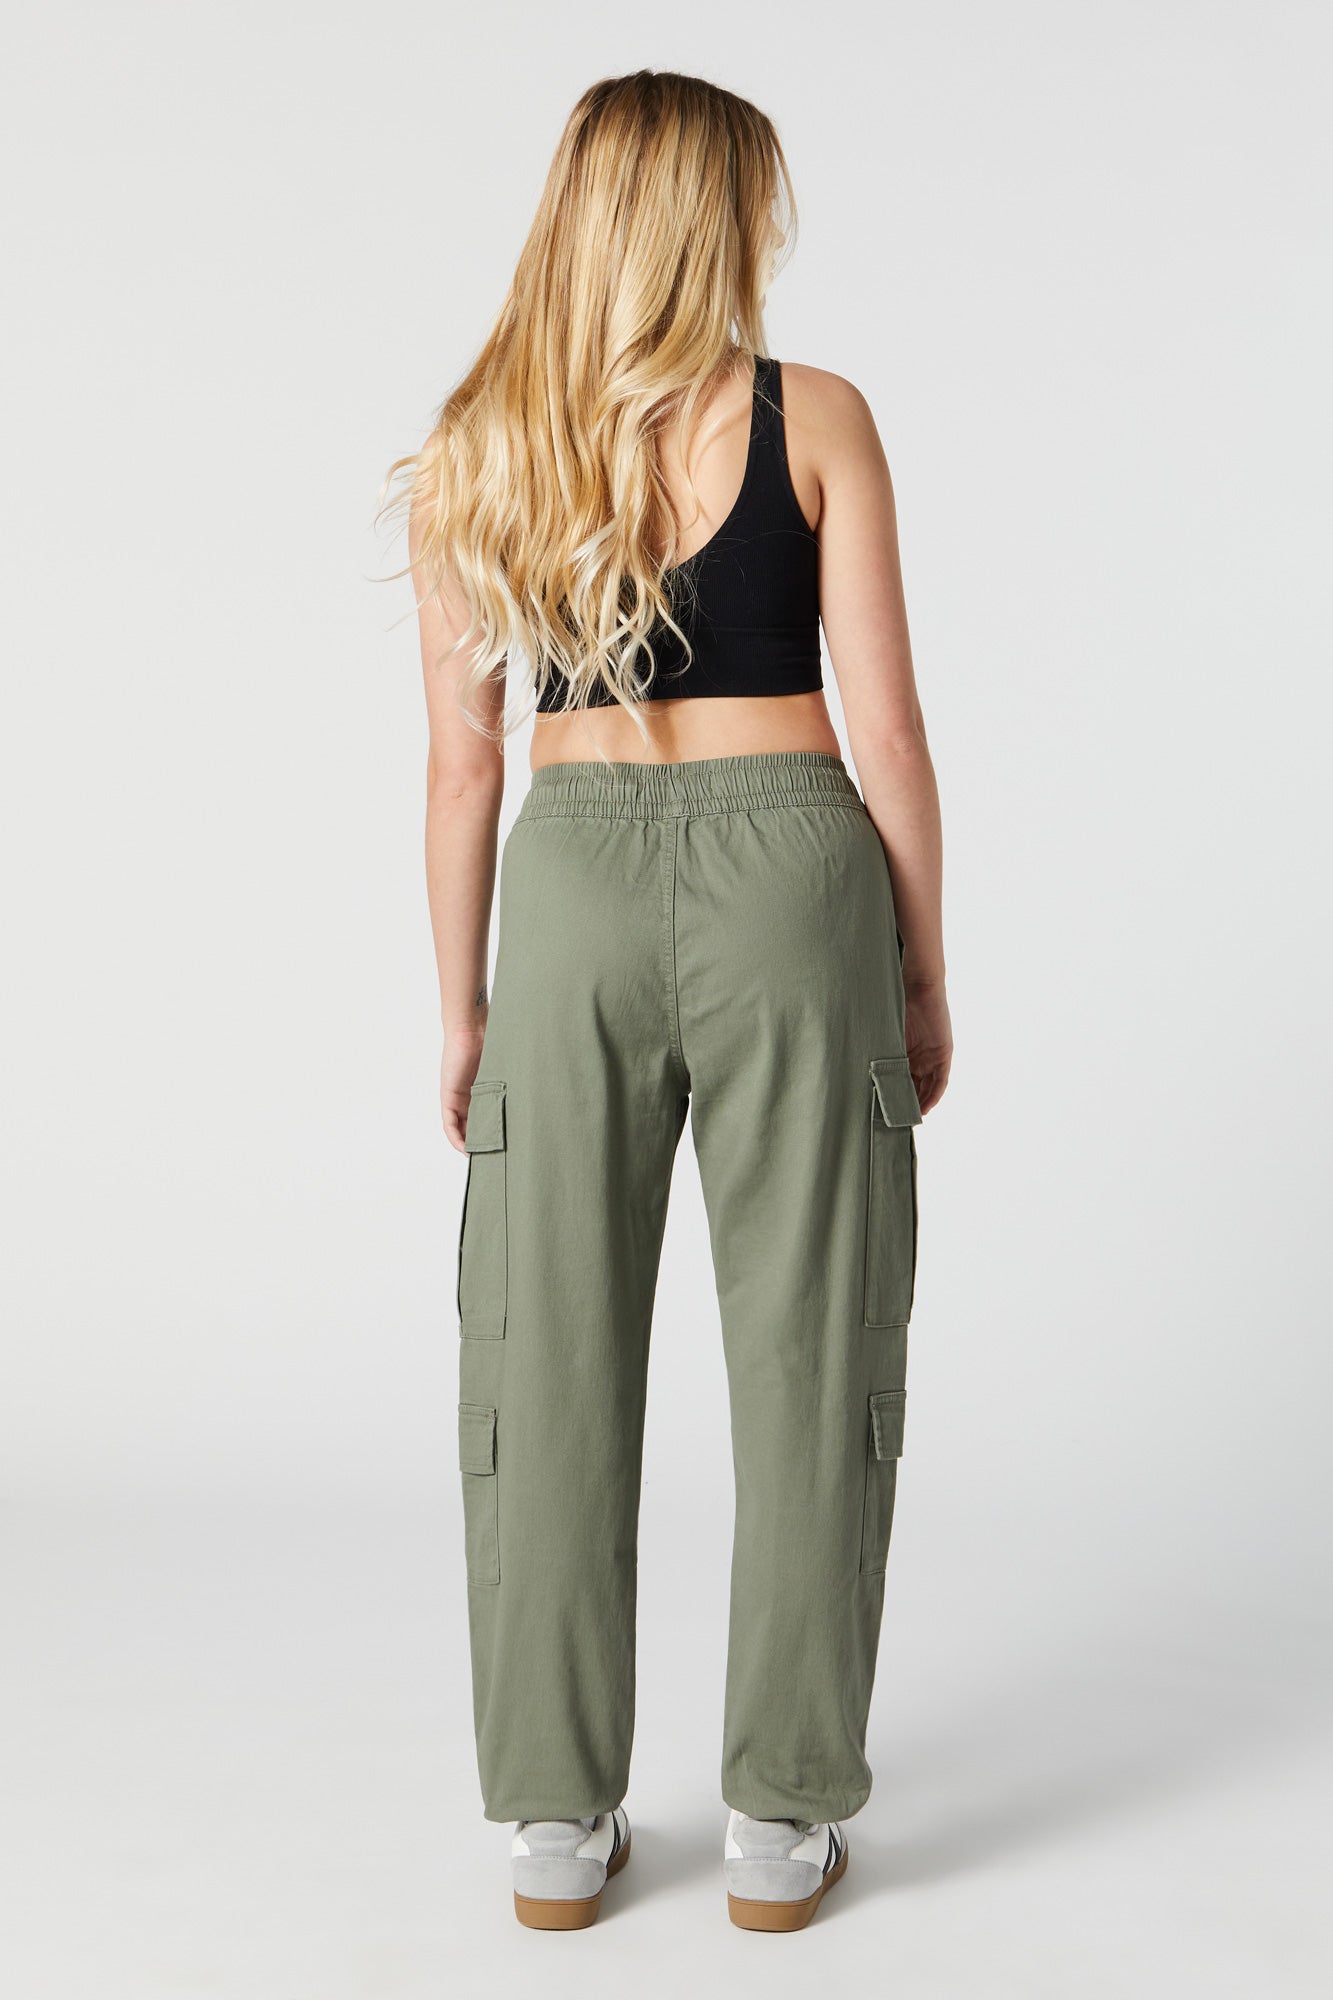 ZUTY Womens 27 Cargo Pants Joggers Quick Dry Palestine